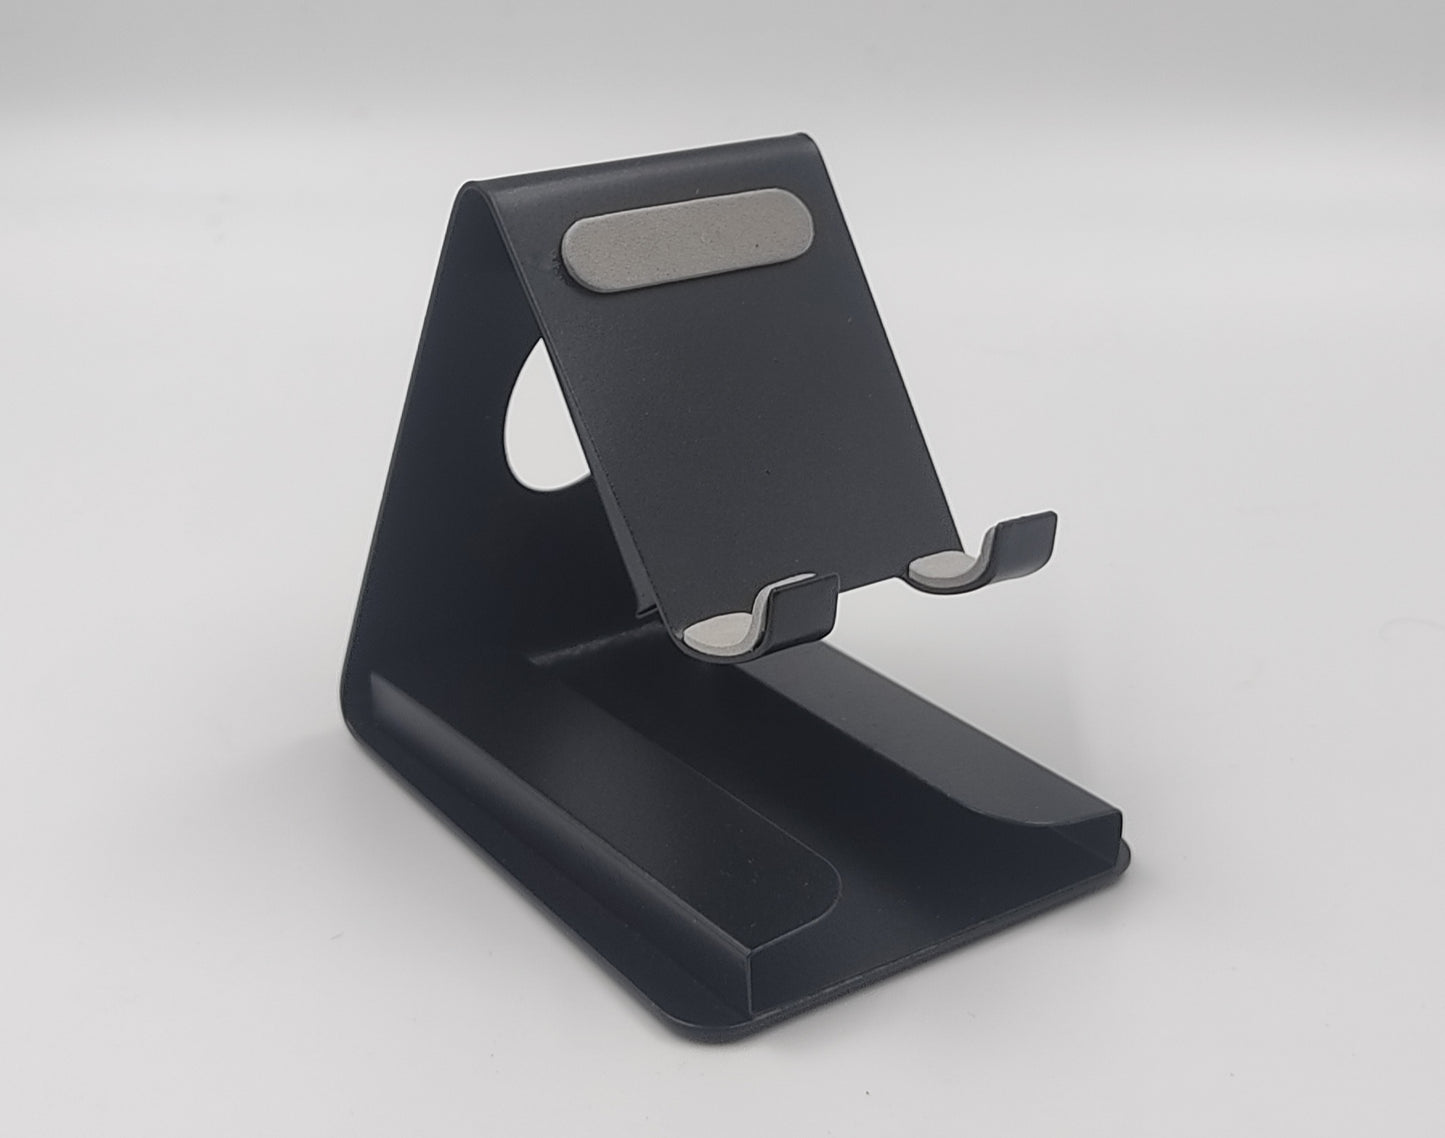 Metal Multi Mobile Stand With Visiting Card Holder And Double Pen Holder